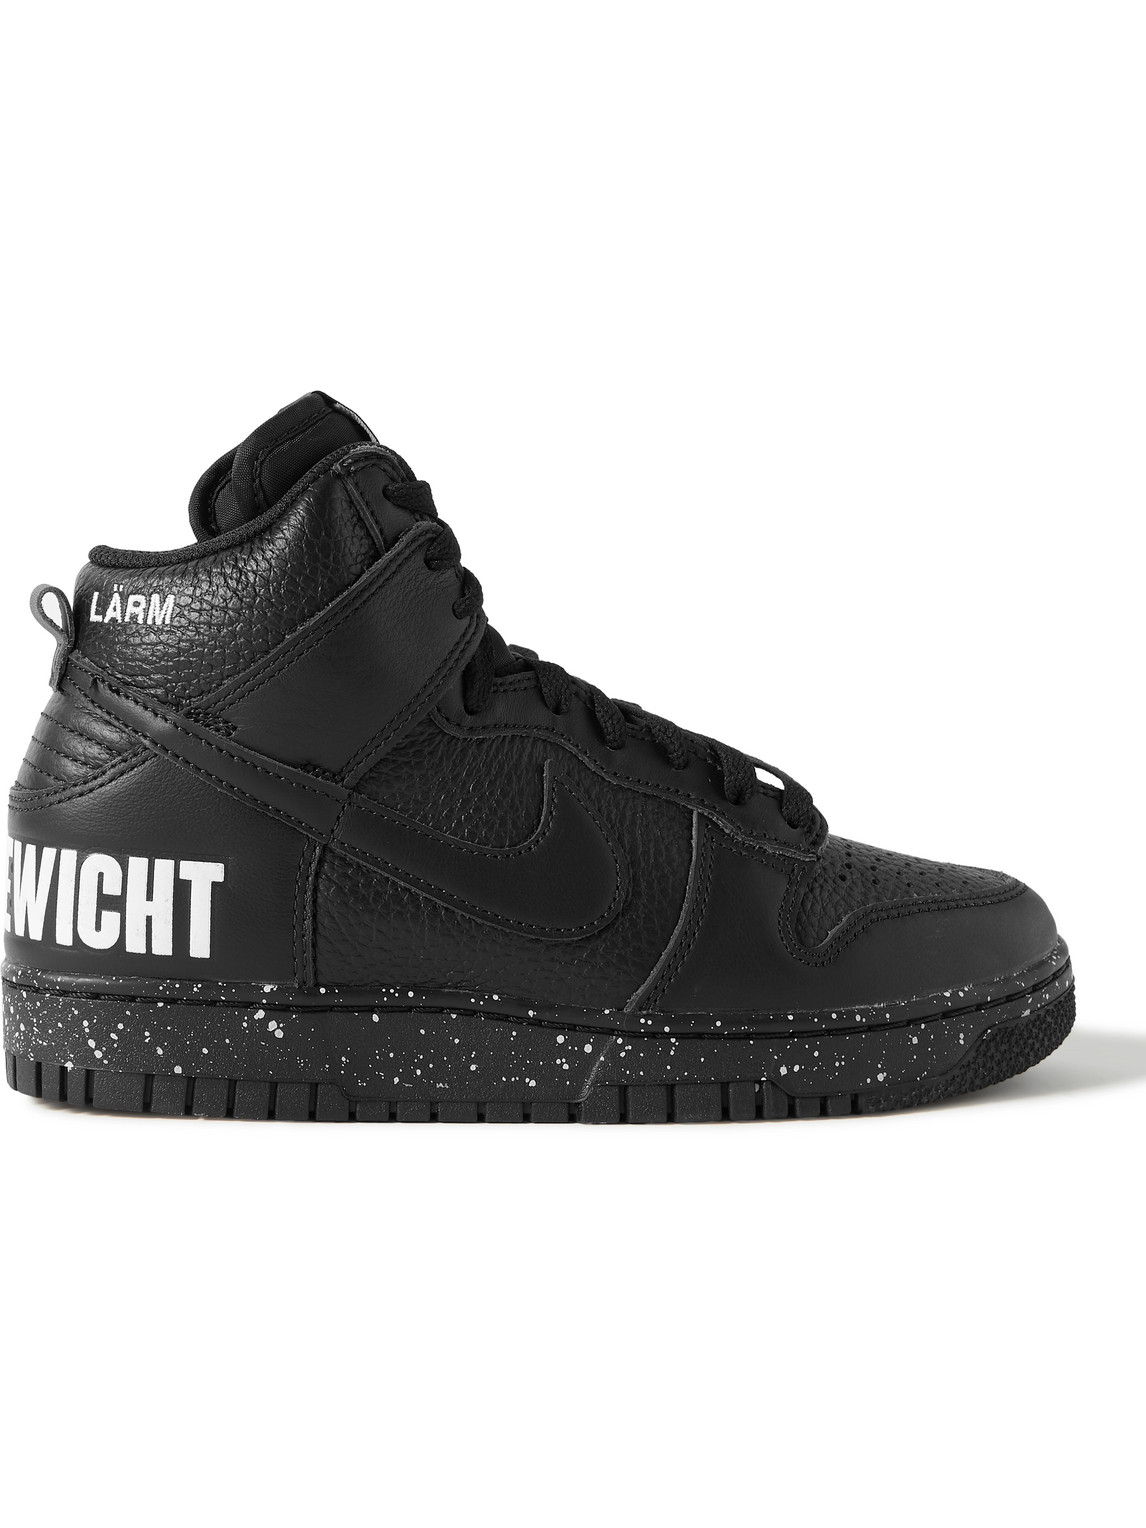 Undercover Dunk Hi 1985 Leather High-Top Sneakers